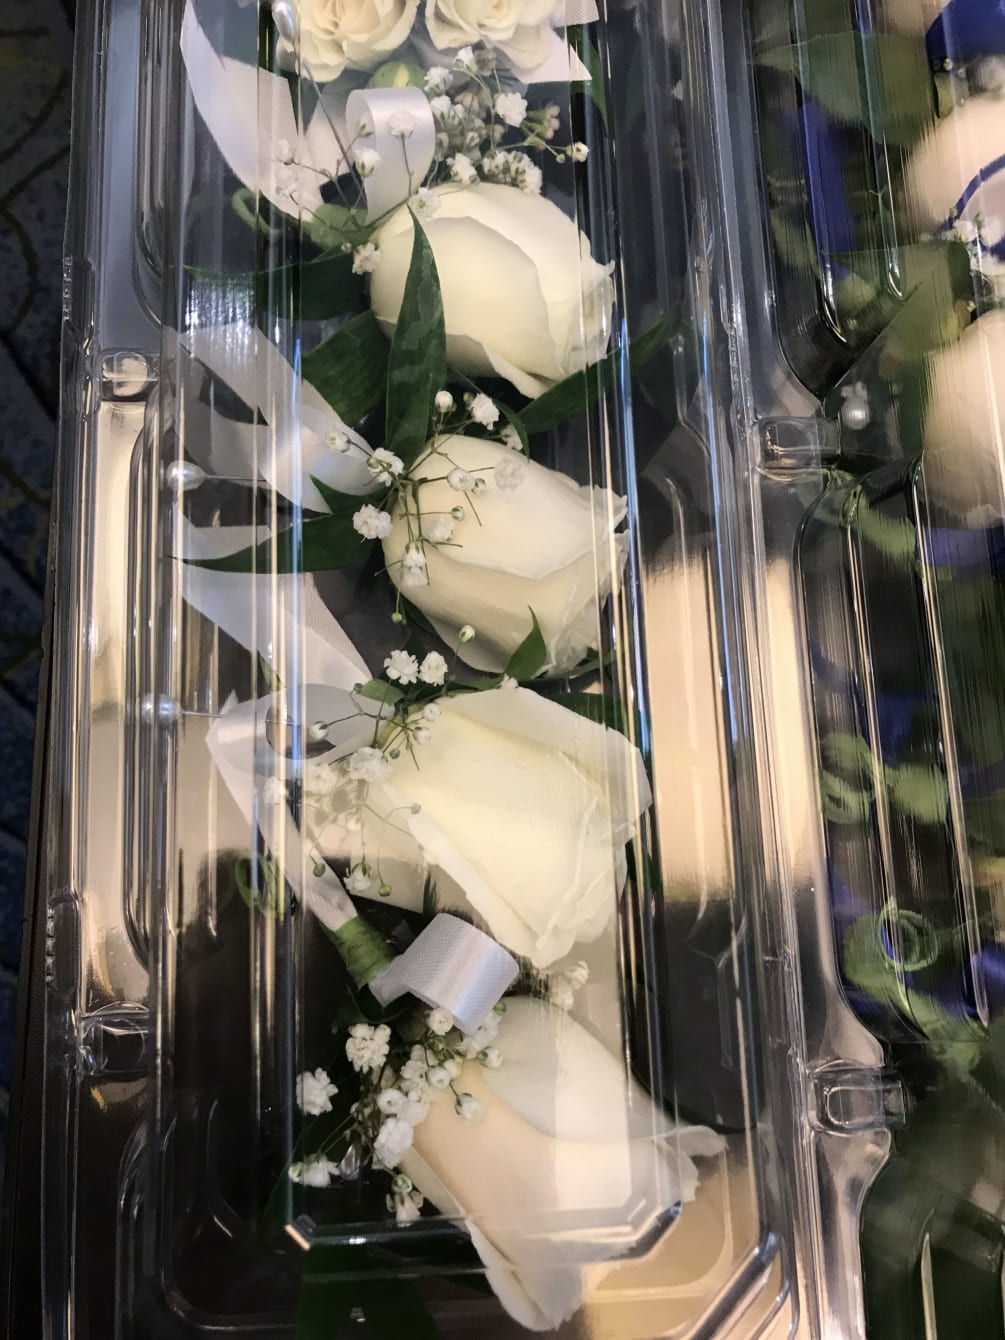 PREMIUM ROSE BOUTONNIERE BY TWIN TOWERS FLORIST 